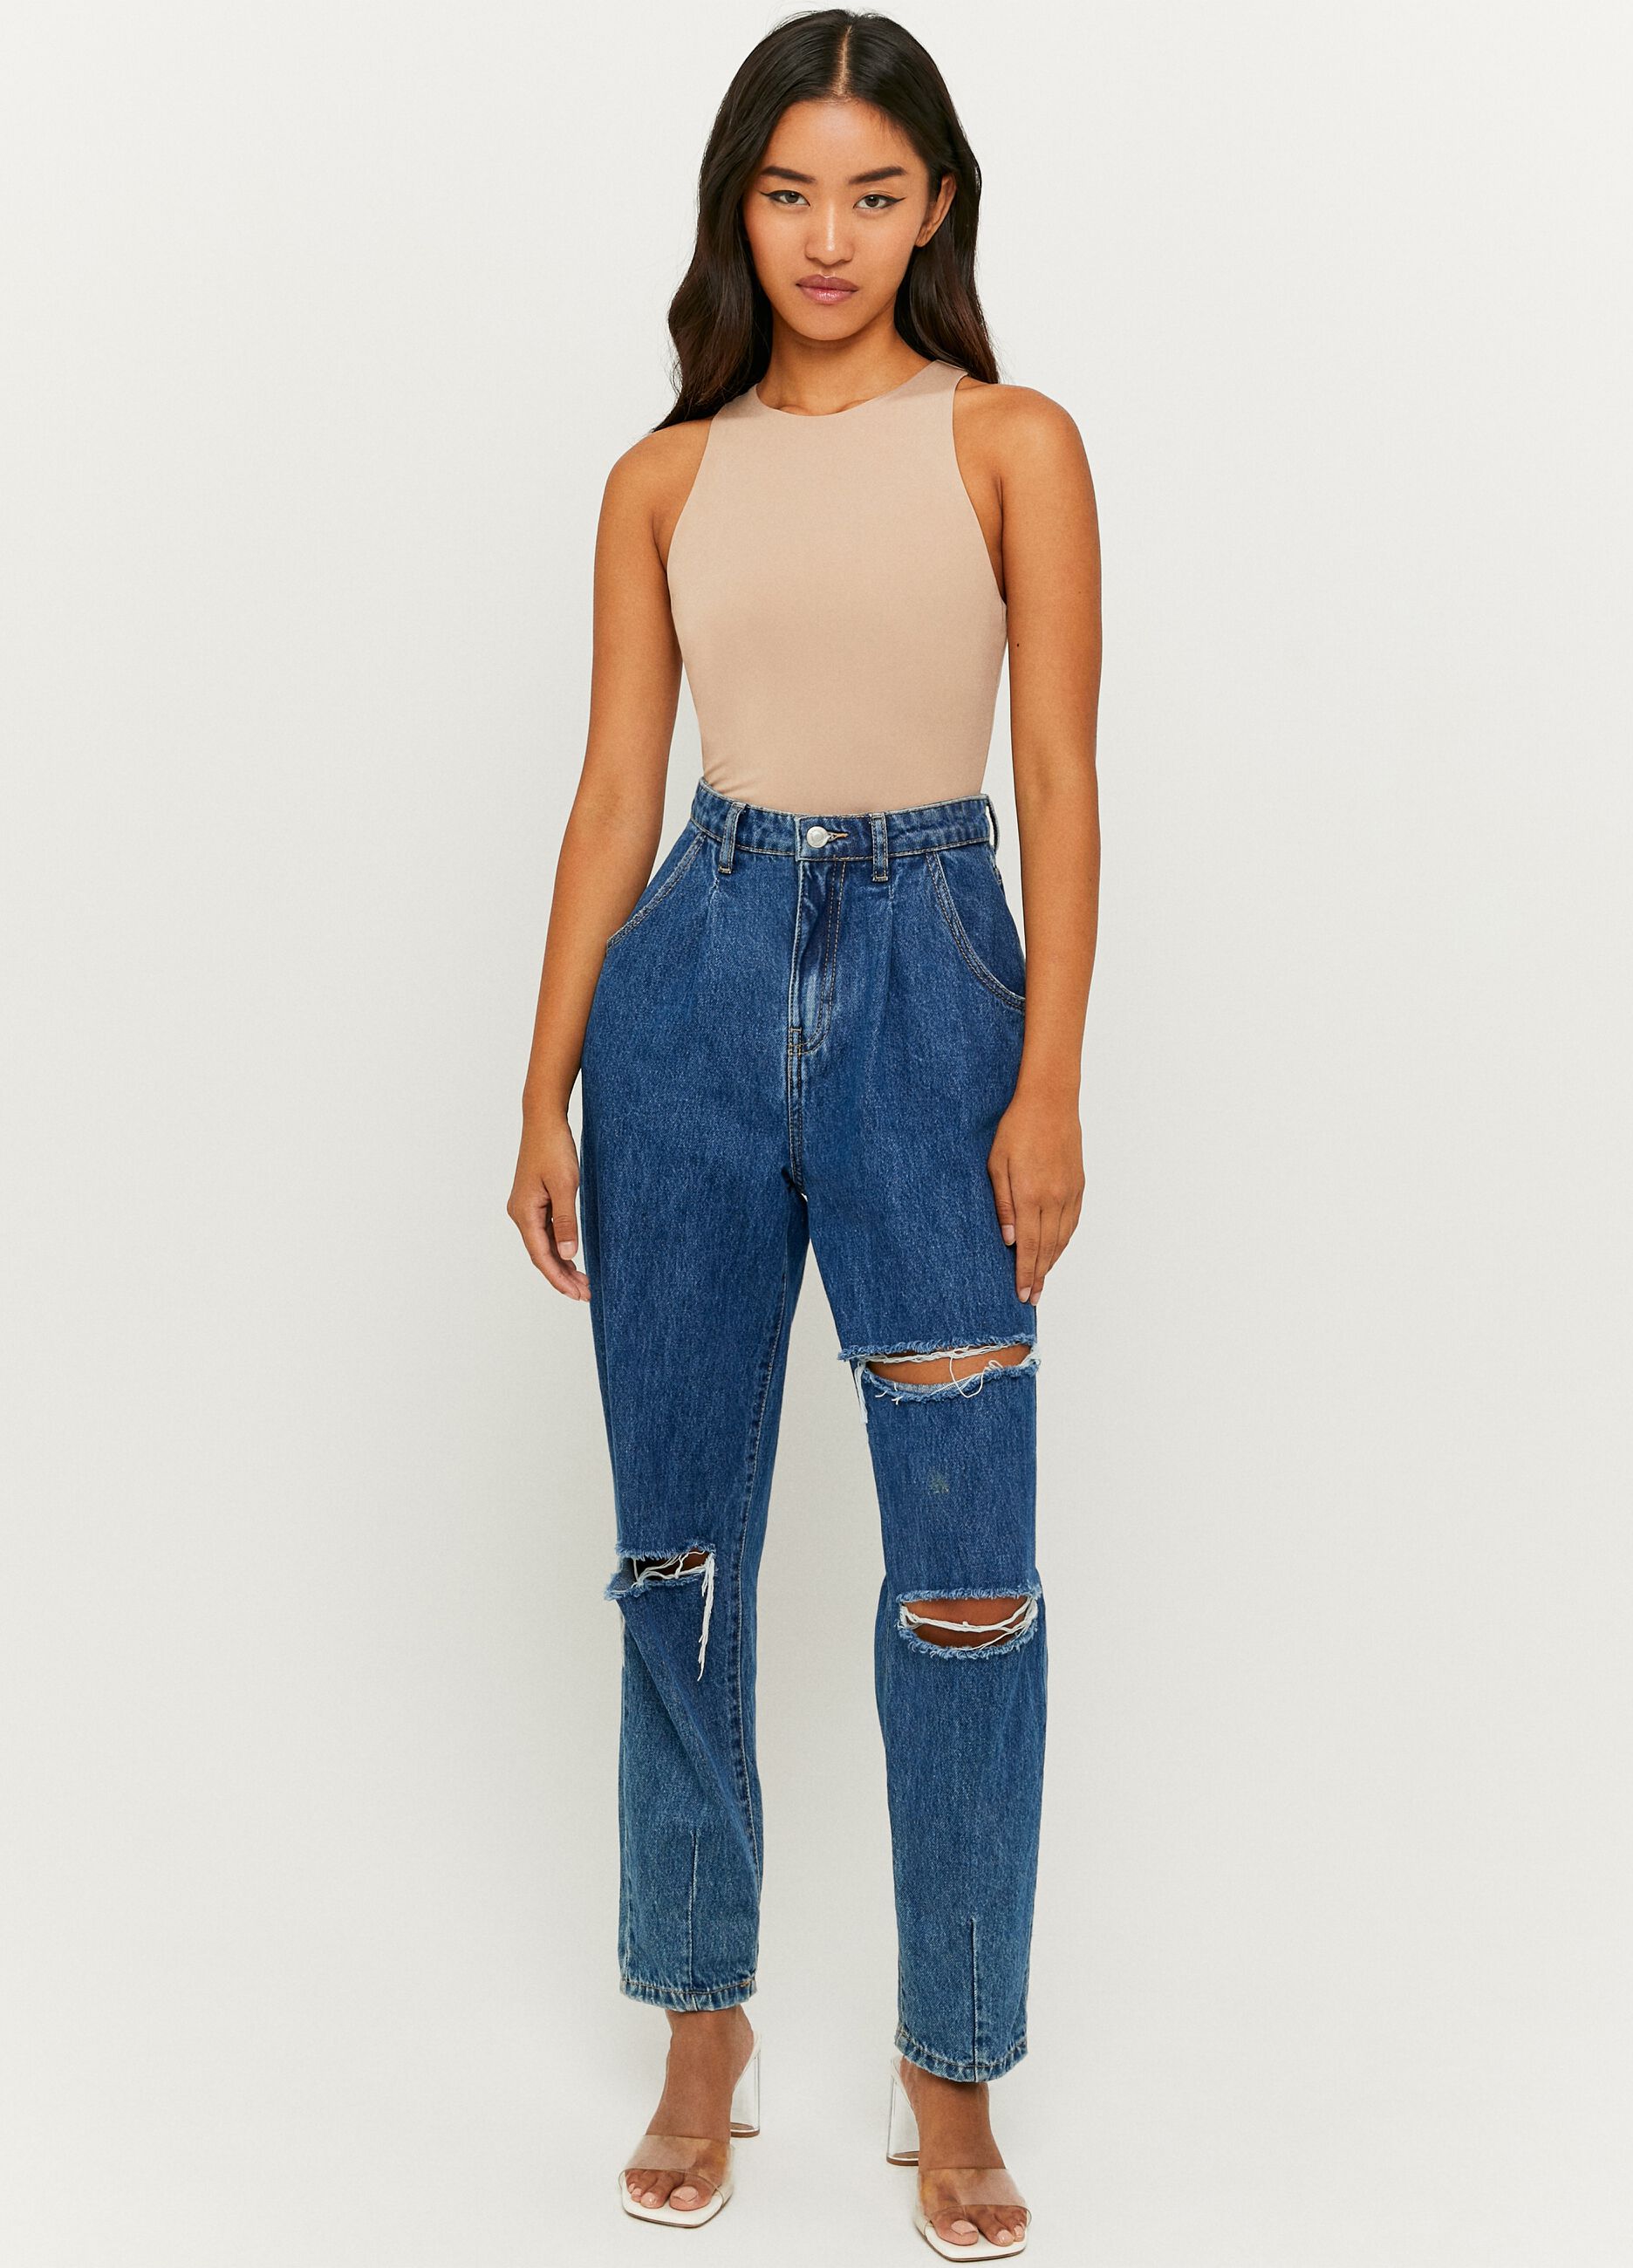 Slouchy jeans with rips